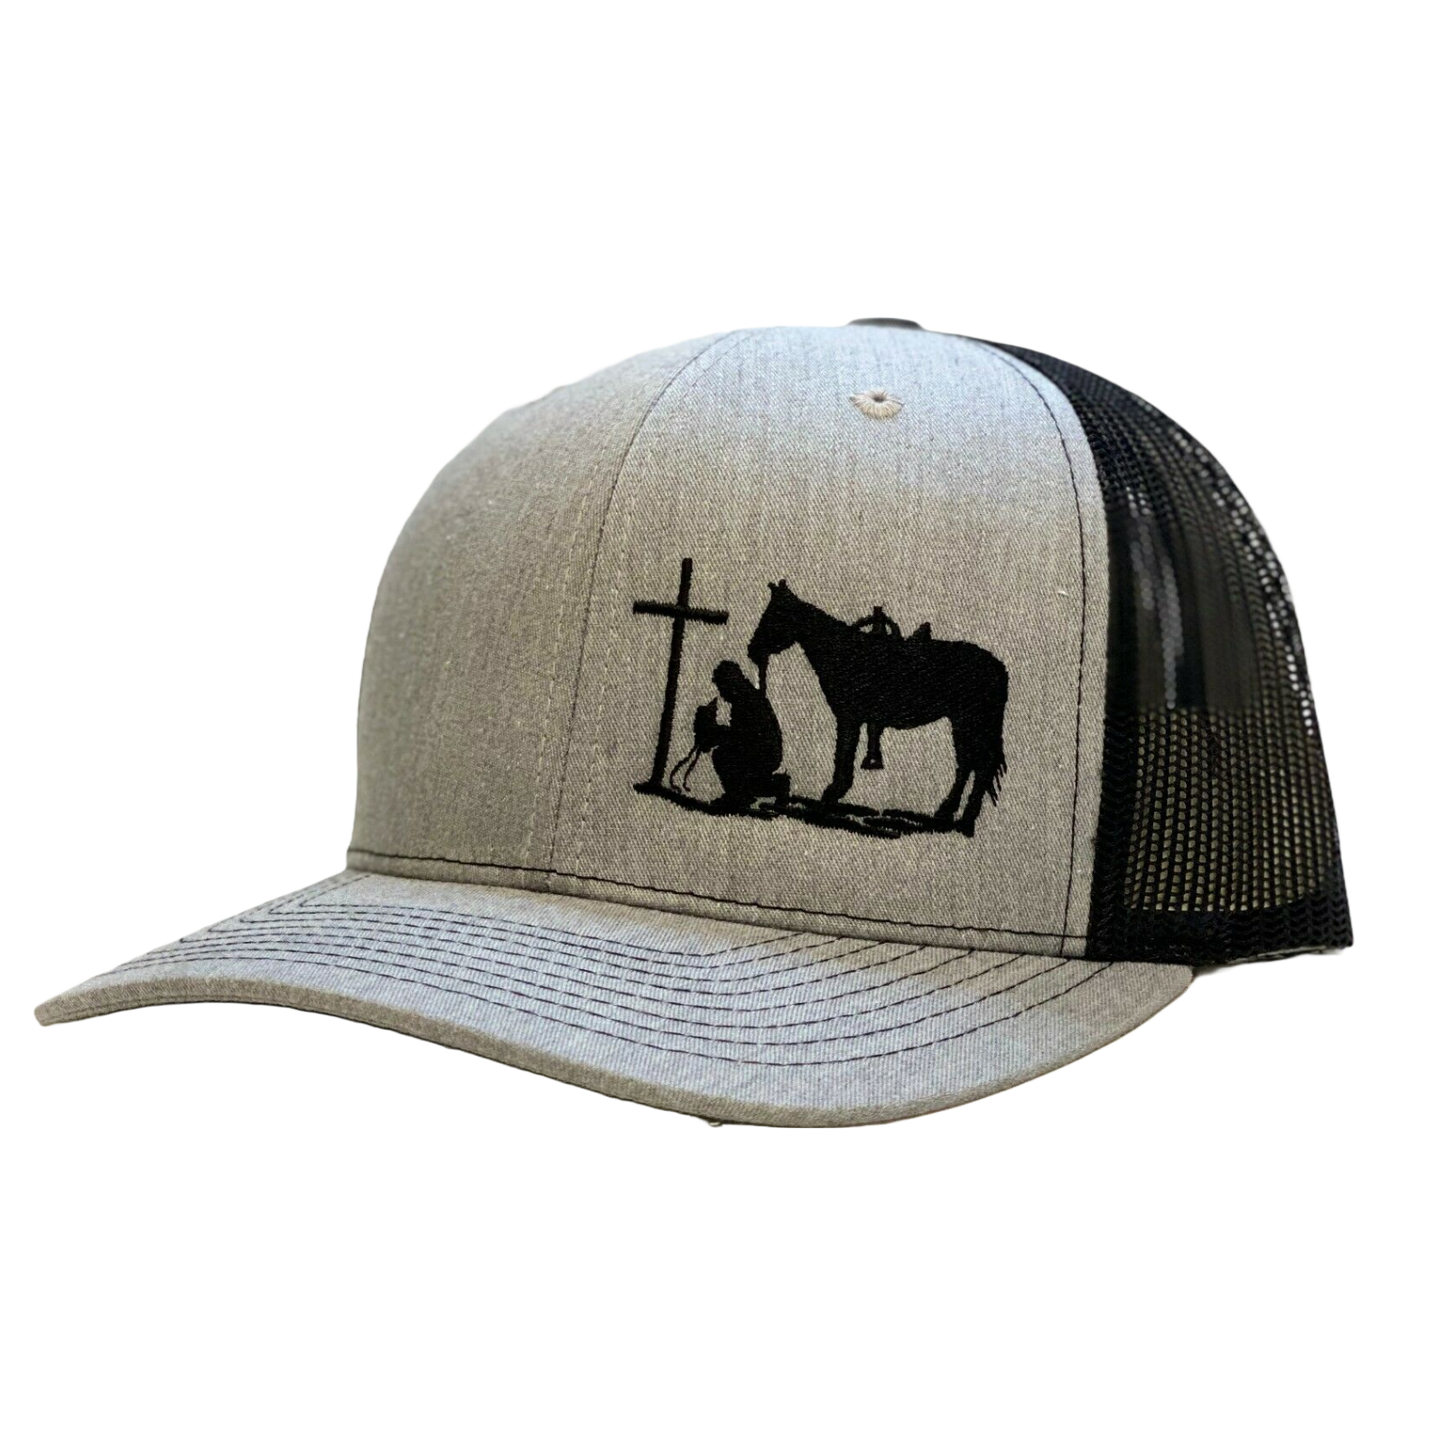 Load image into Gallery viewer, Dally Up Heather Grey and Black Cowboy Praying Snapback Cap DALLY-160
